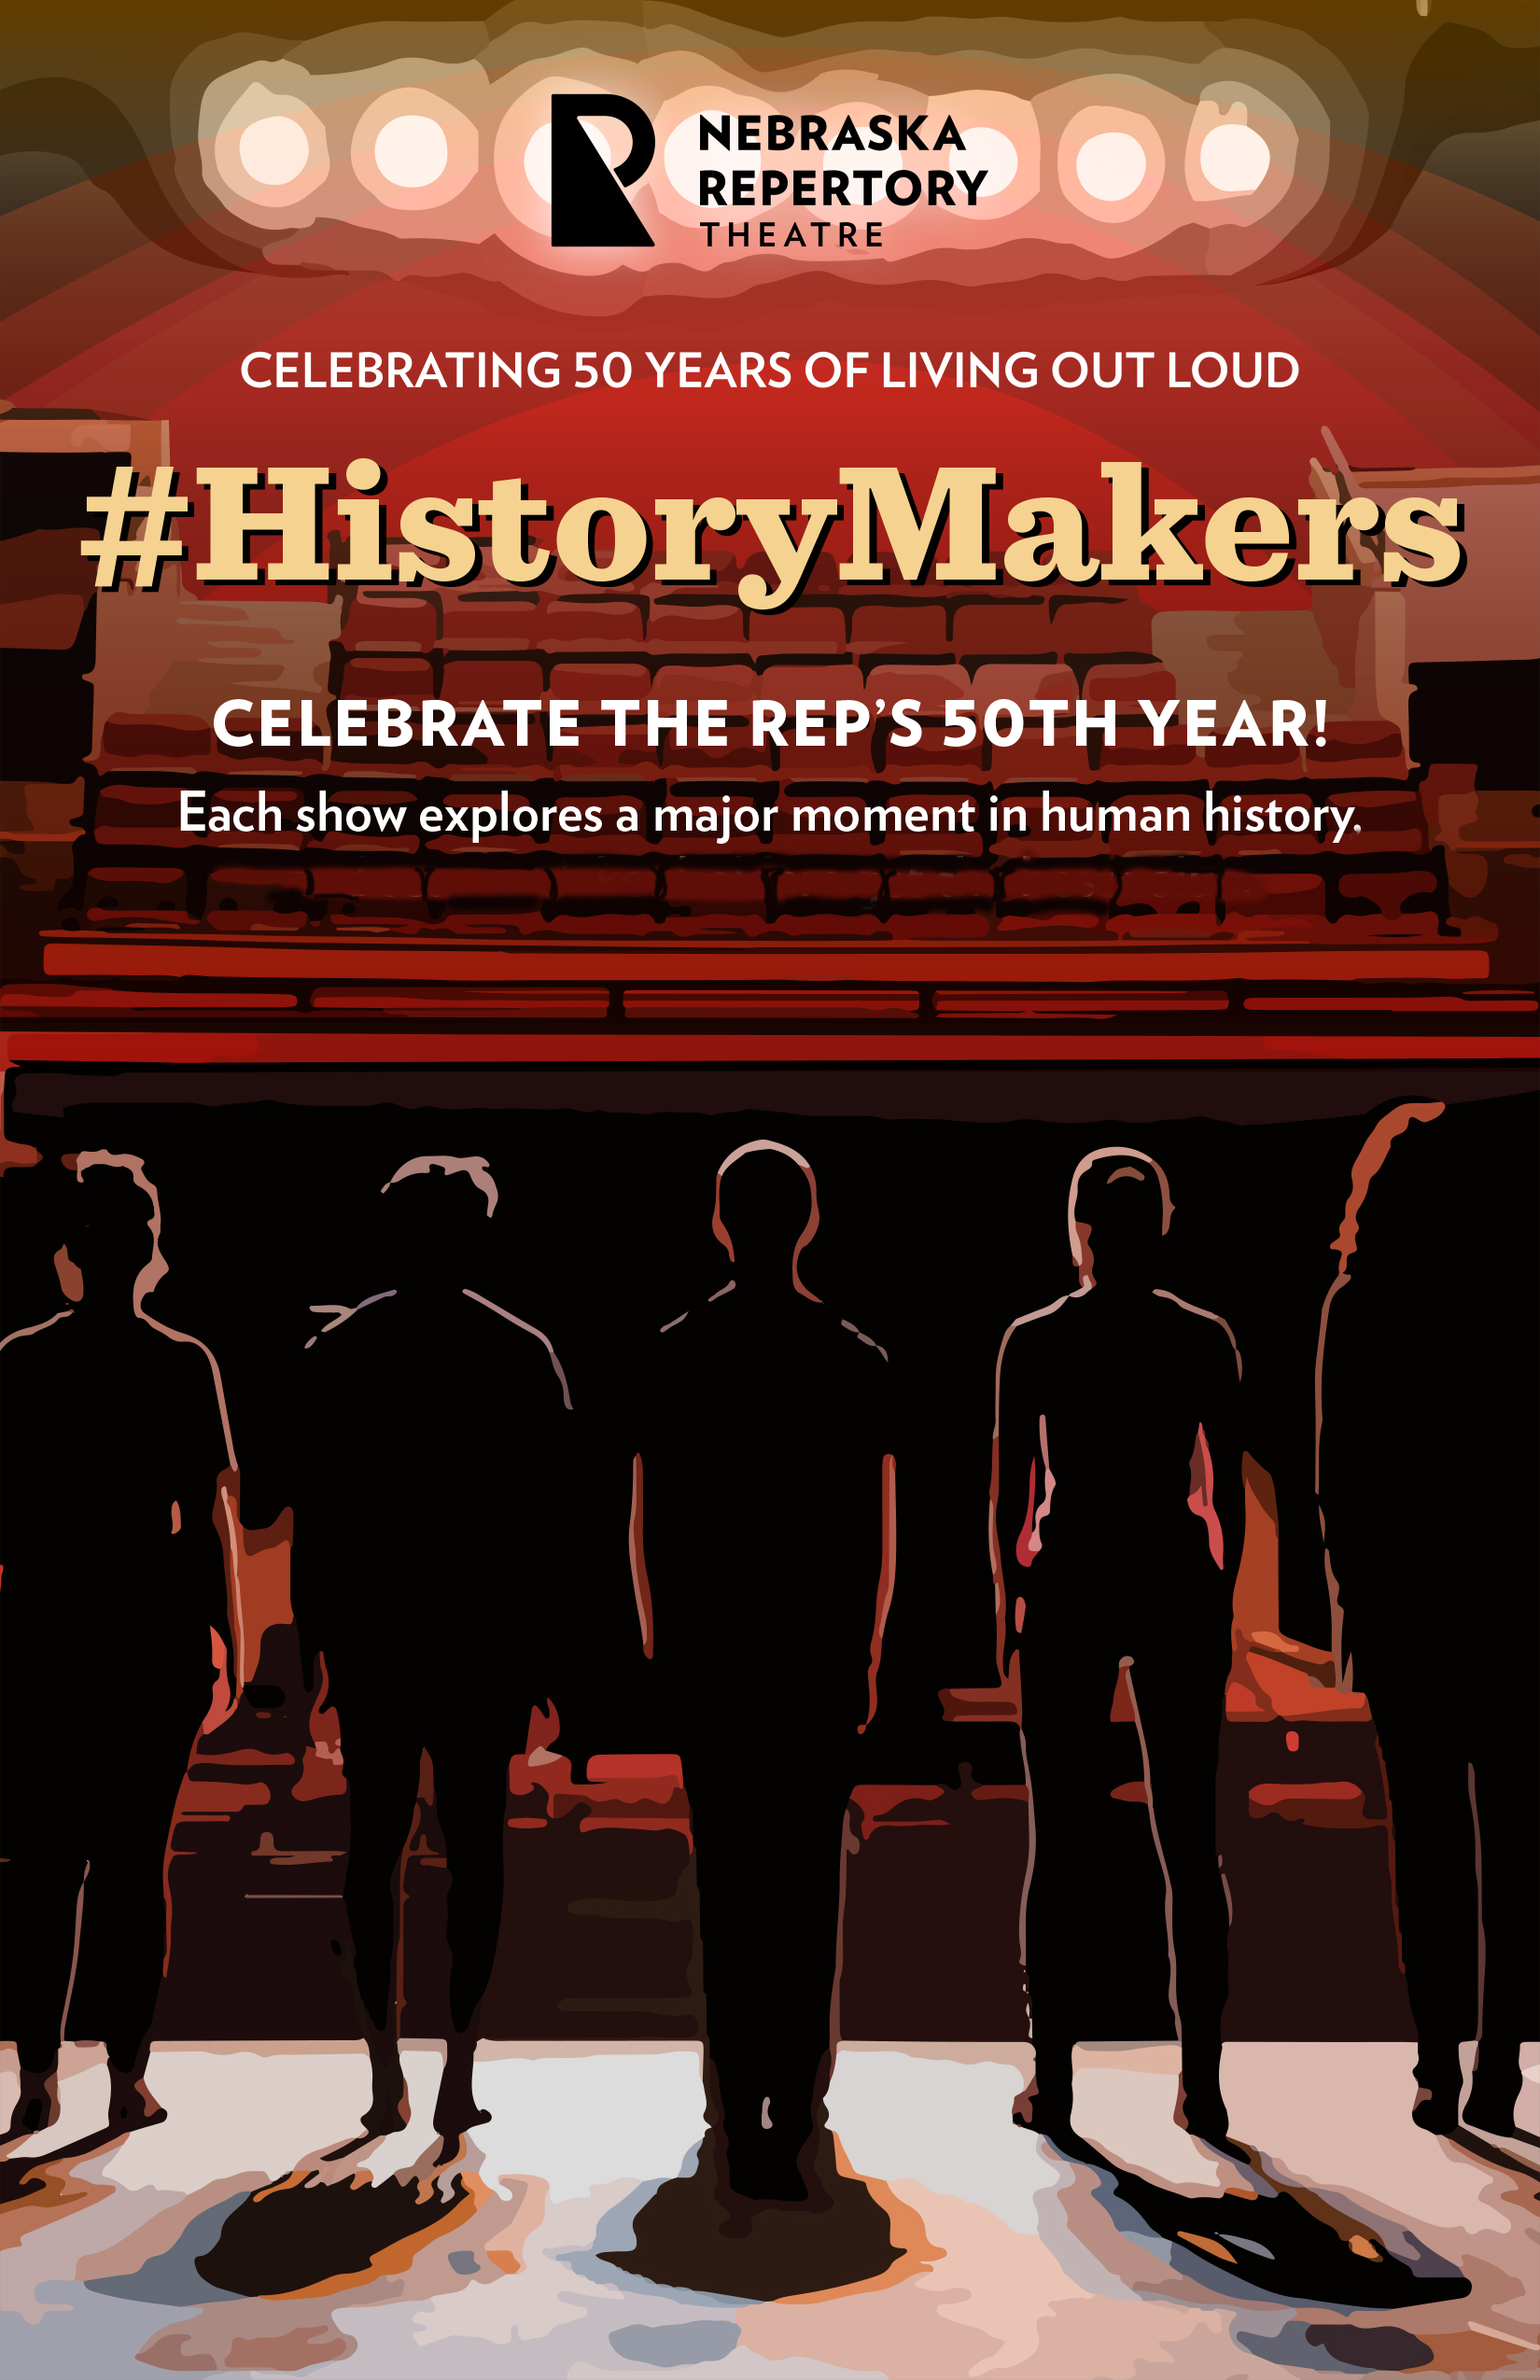 The Nebraska Repertory Theatre's 50th season in 2018-2019 is titled "History Makers."